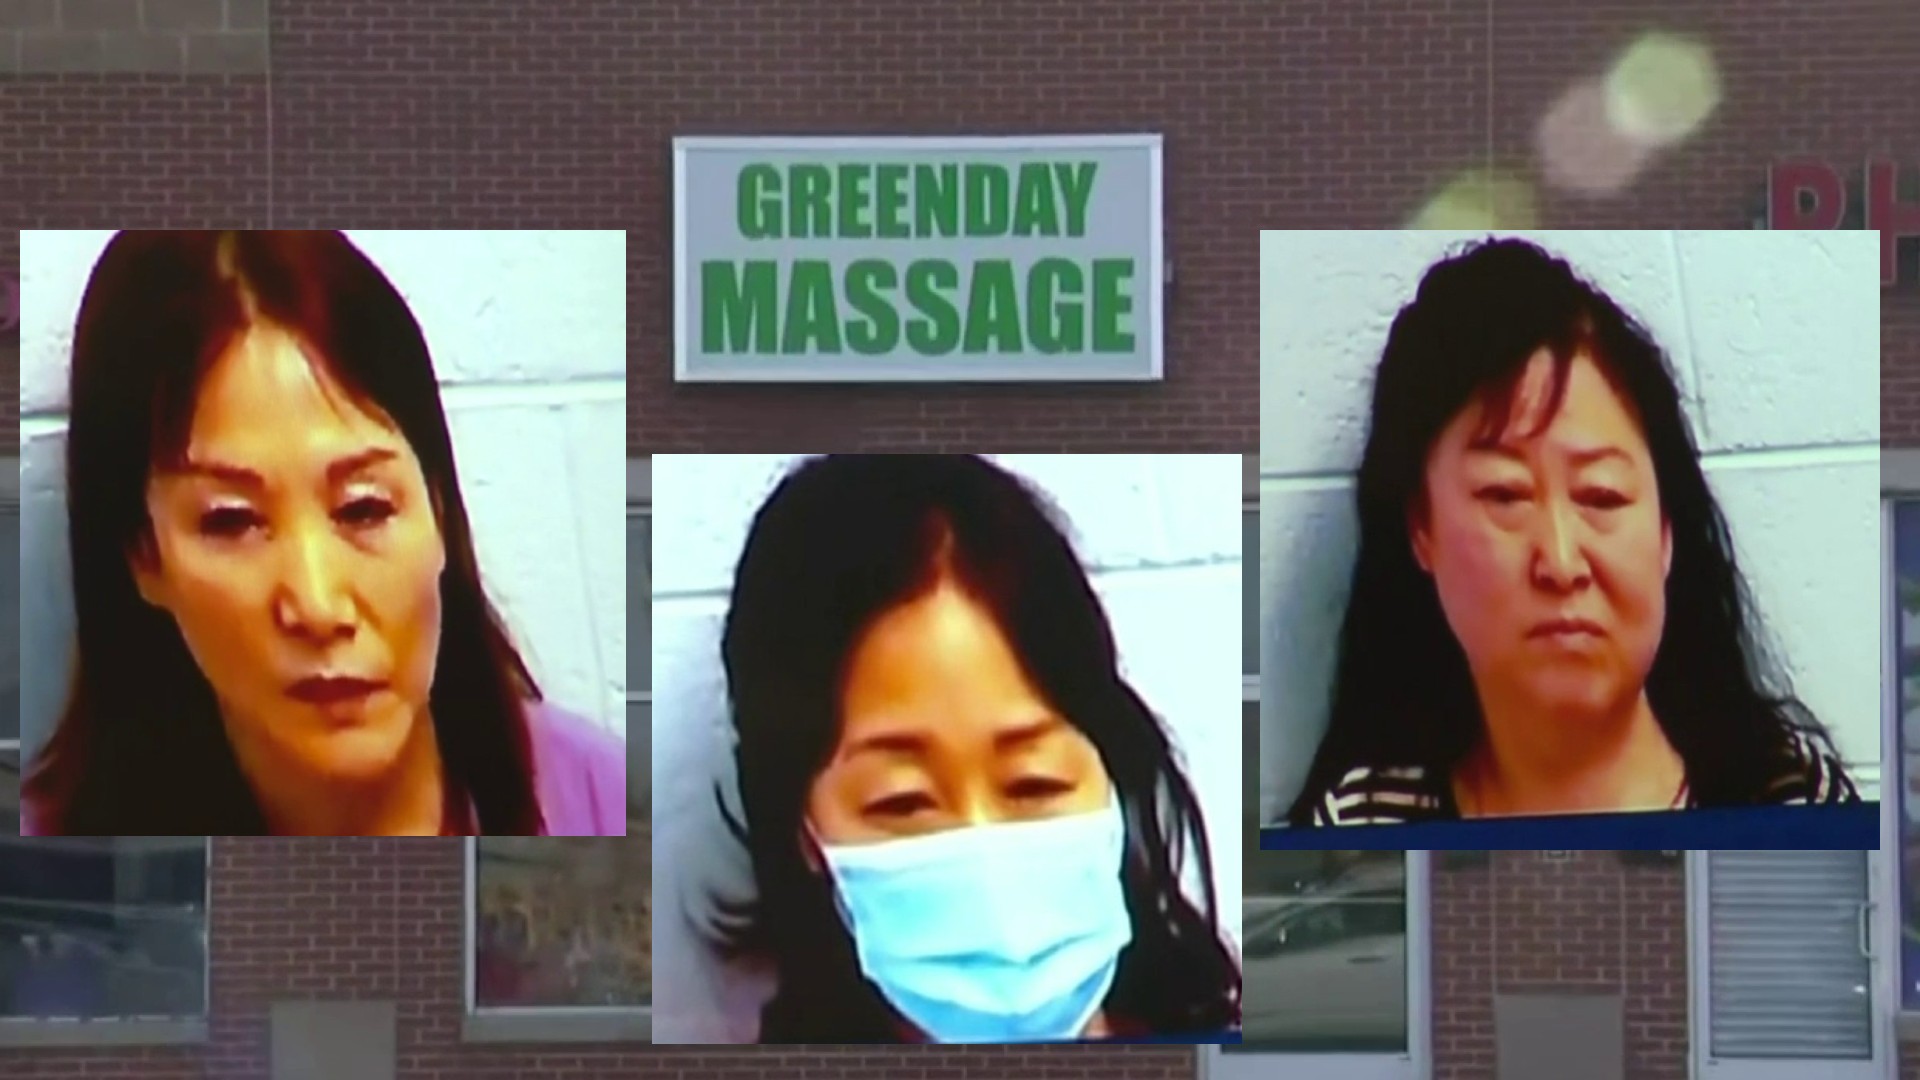 3 women charged for operating brothel after sexual favors offered at Warren massage business pic